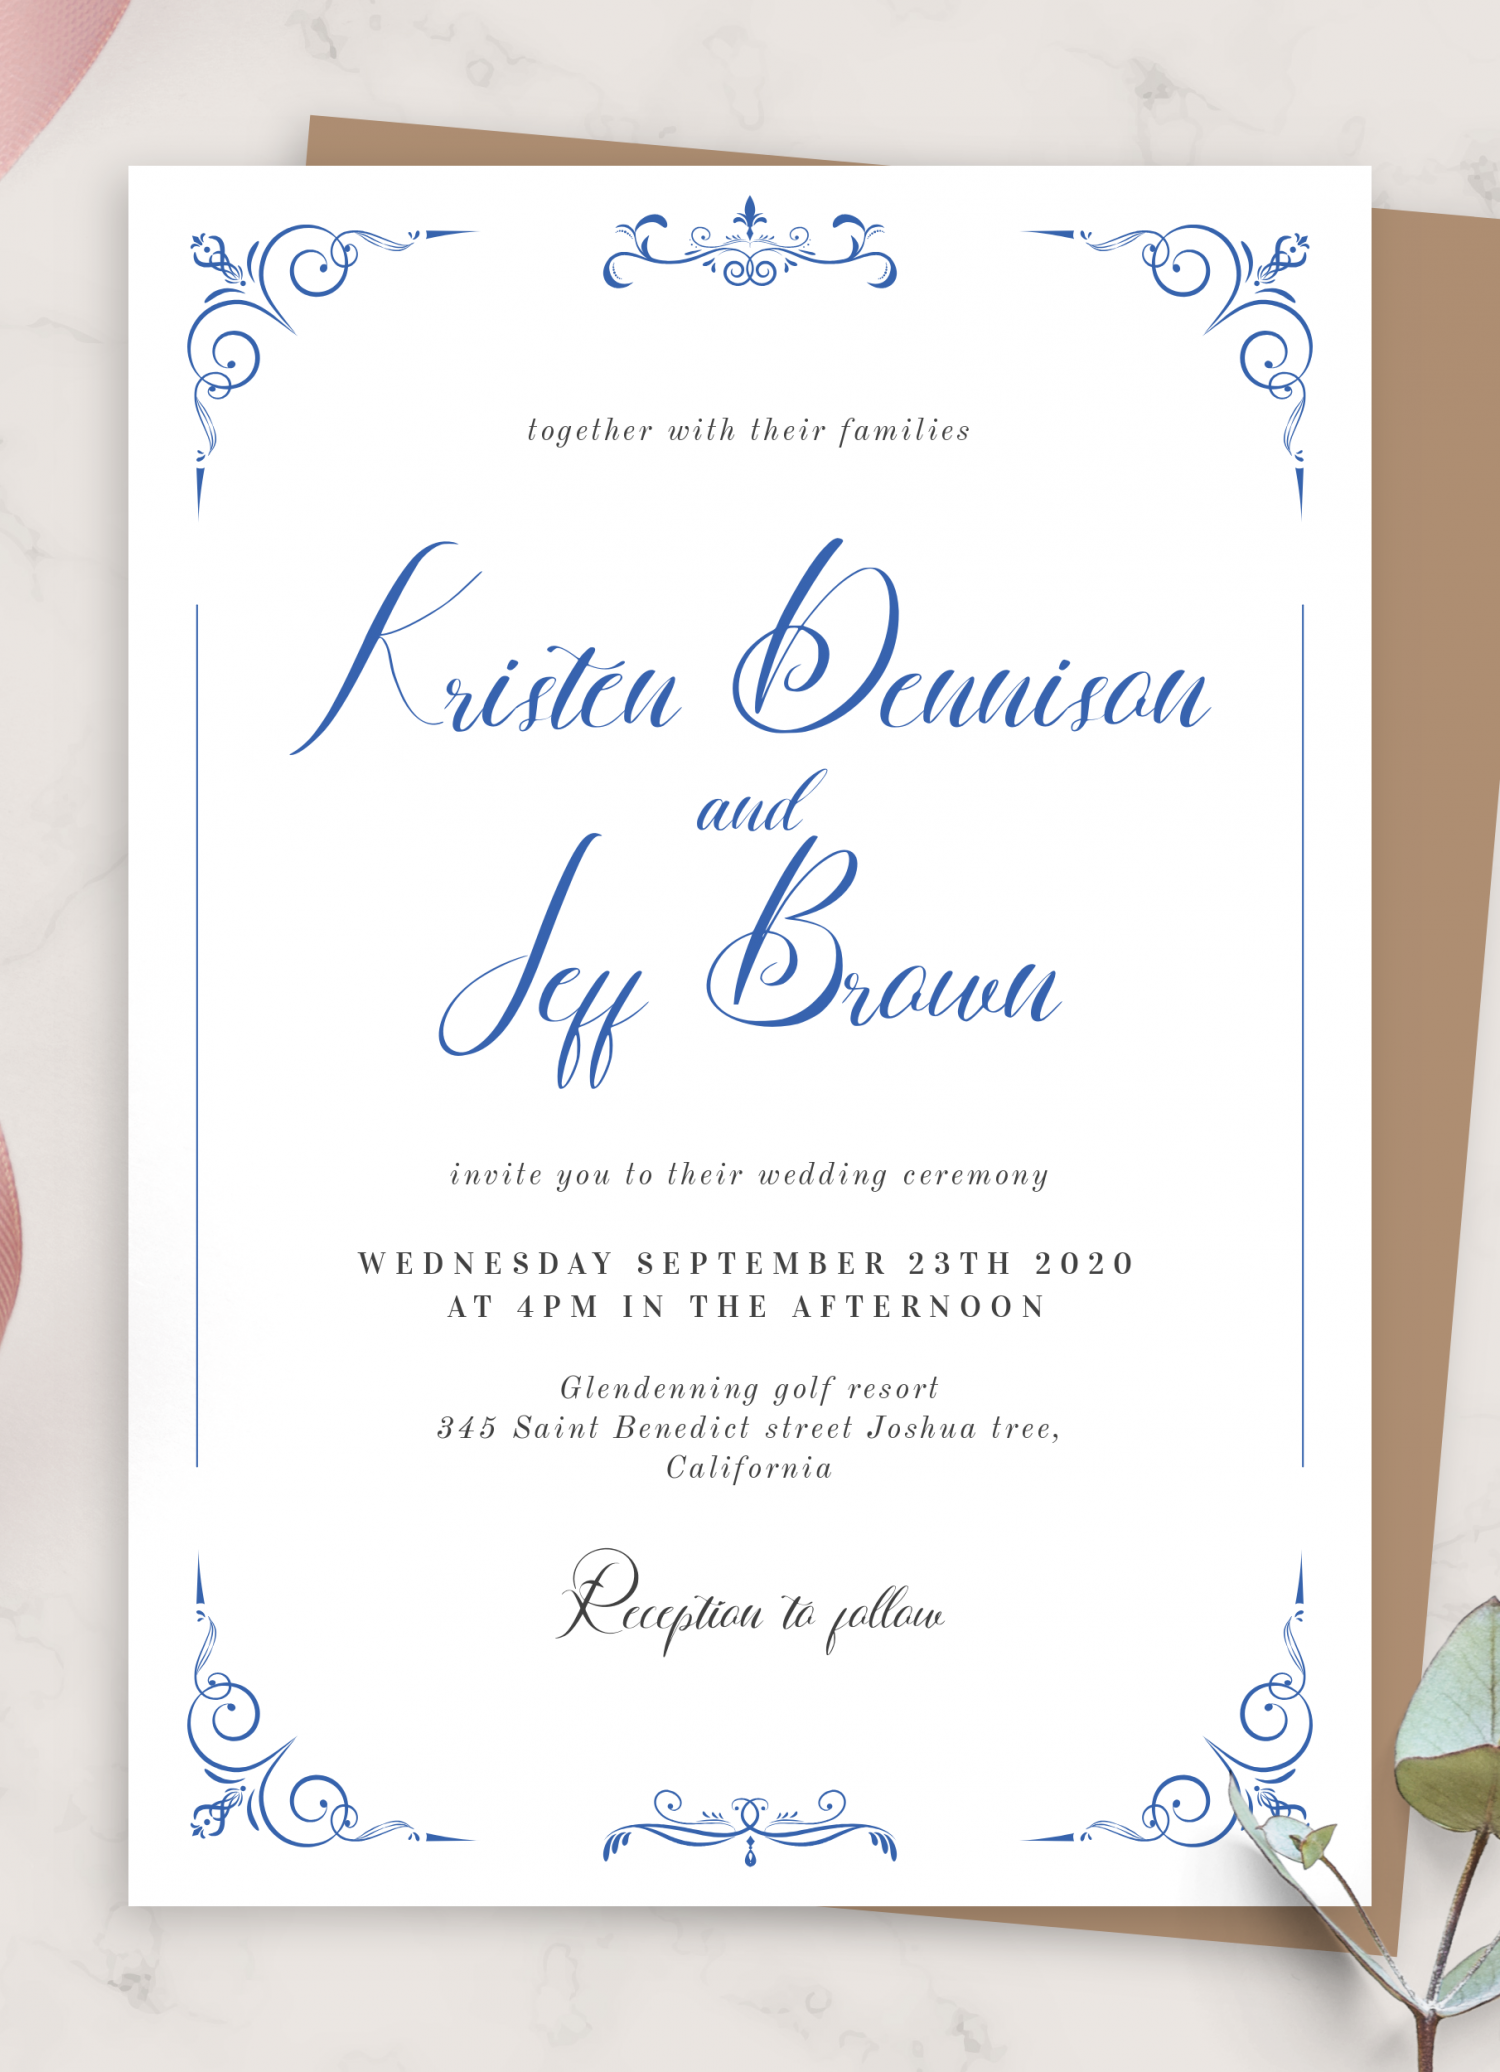 Antique Paper Scroll Party Invitations, Document Scroll Invitation